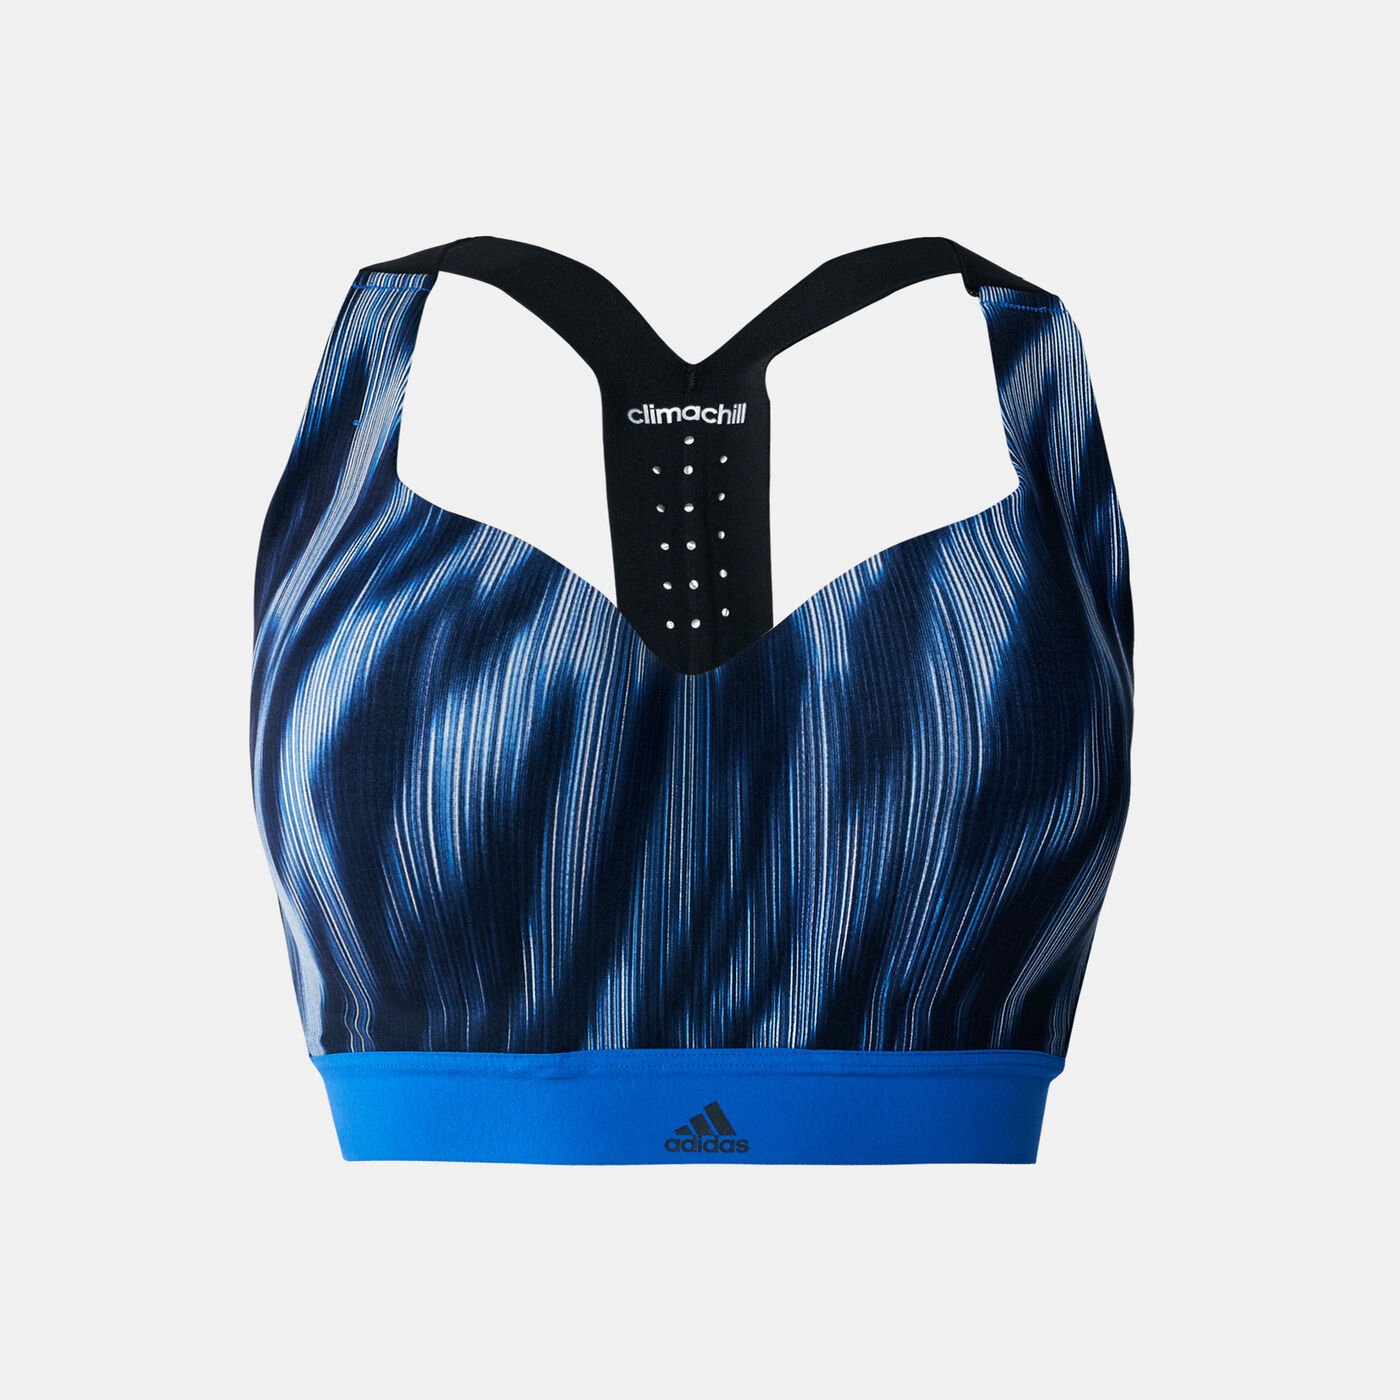 Women's Committed Chill Racerback Sports Bra